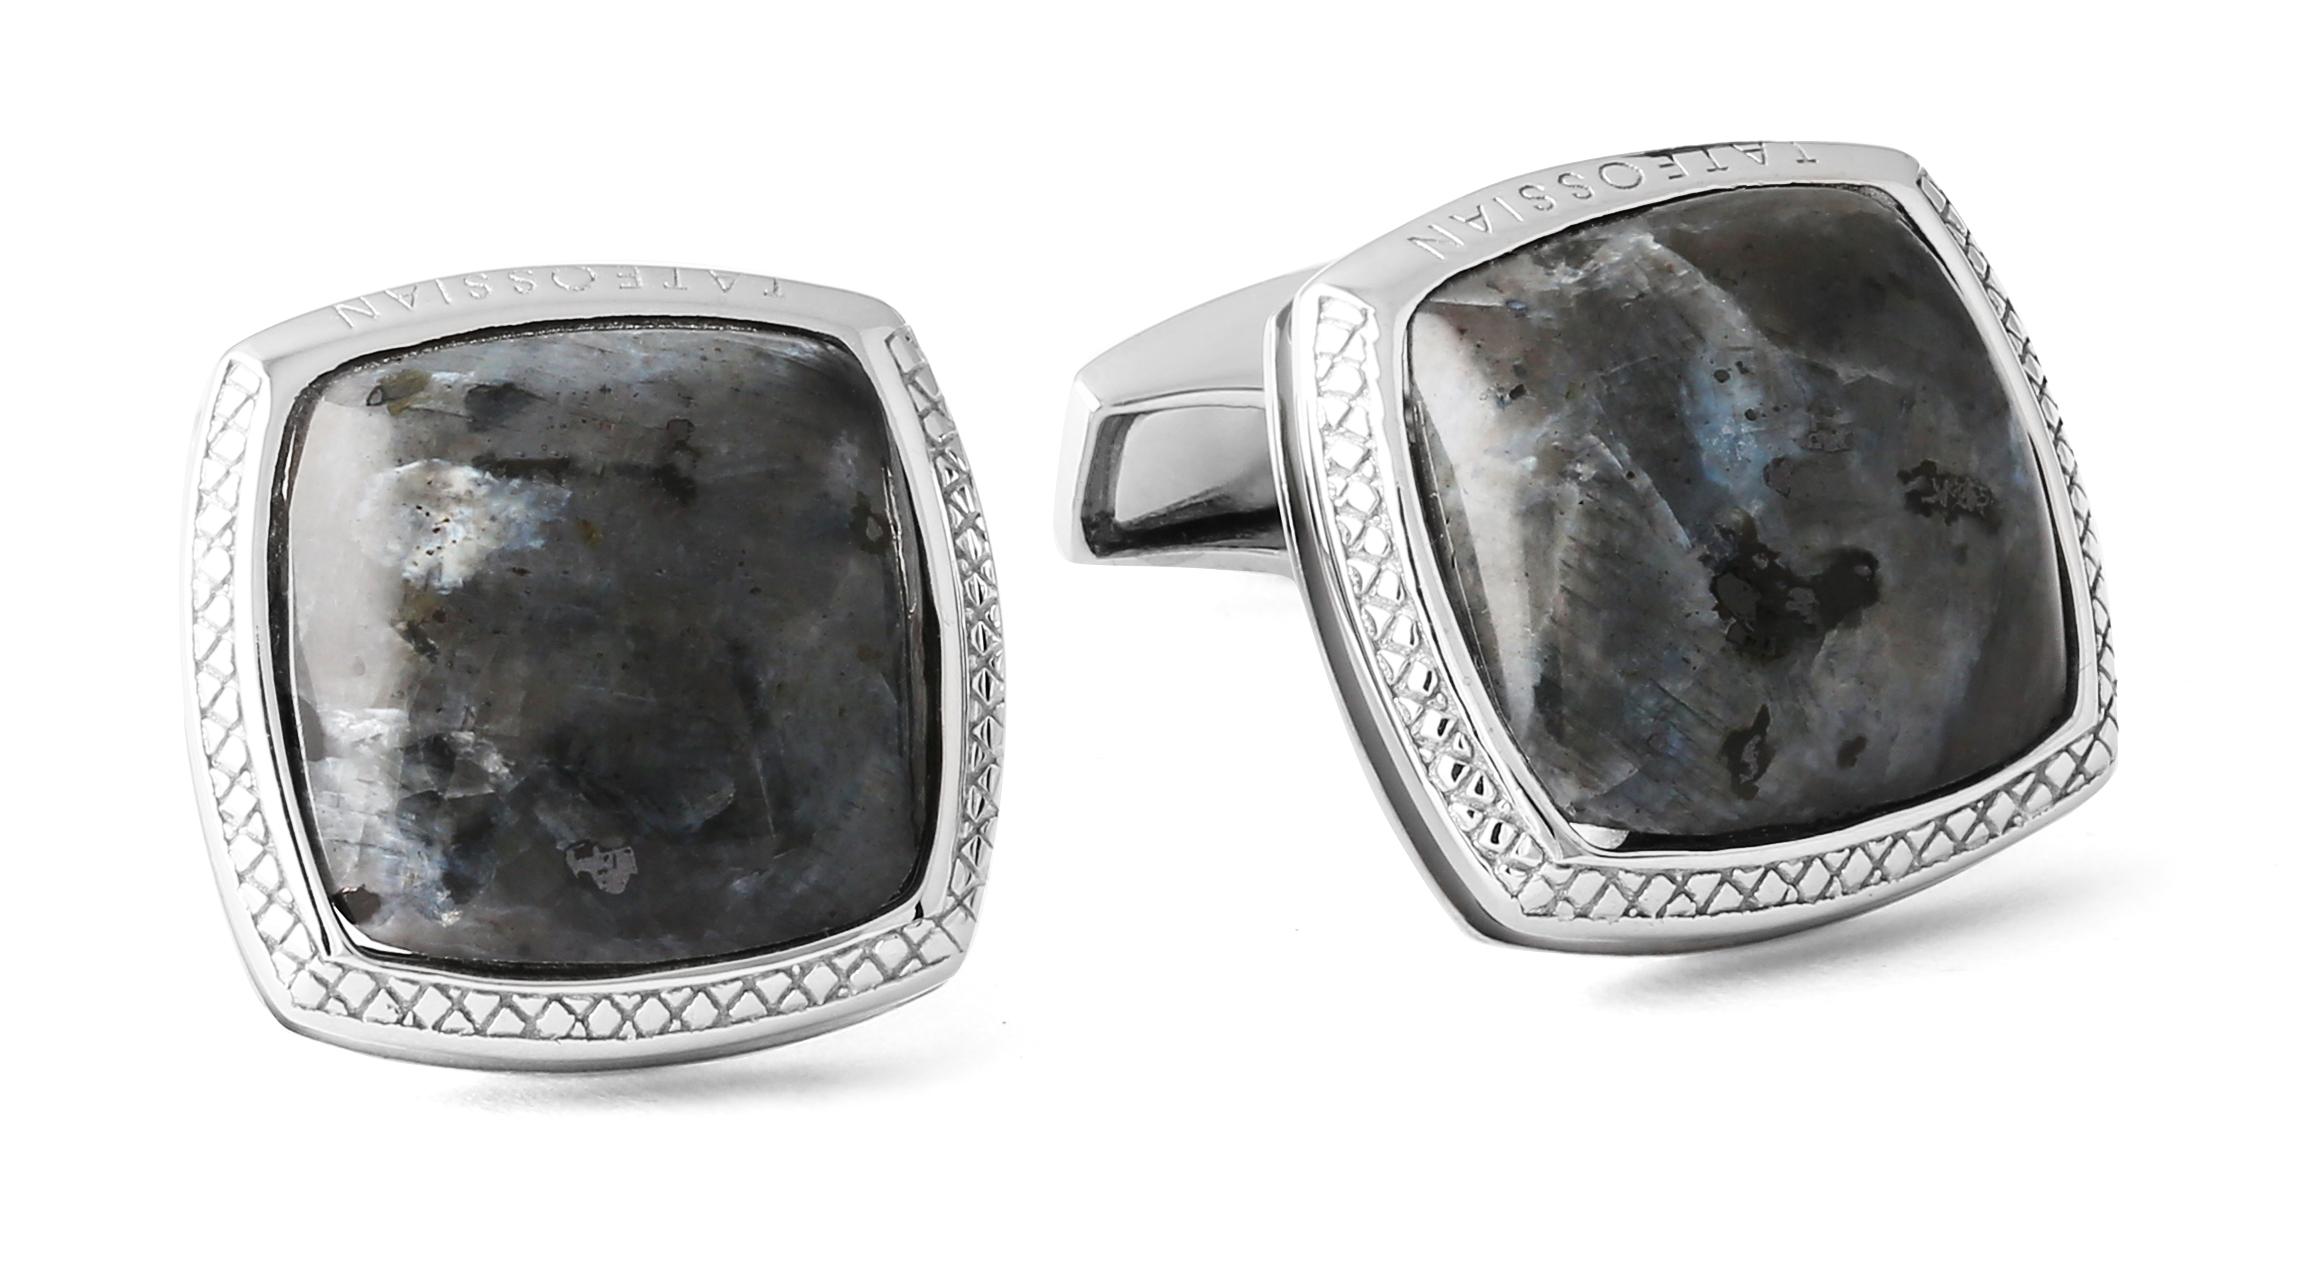 Showcase your individuality with these unique cufflinks, featuring flashes of iridescent blue, pearlescent grey patches and interspersed with deep patches of black. Also known as Larvikite, this stone hails from the fiord region of Larvik, Norway